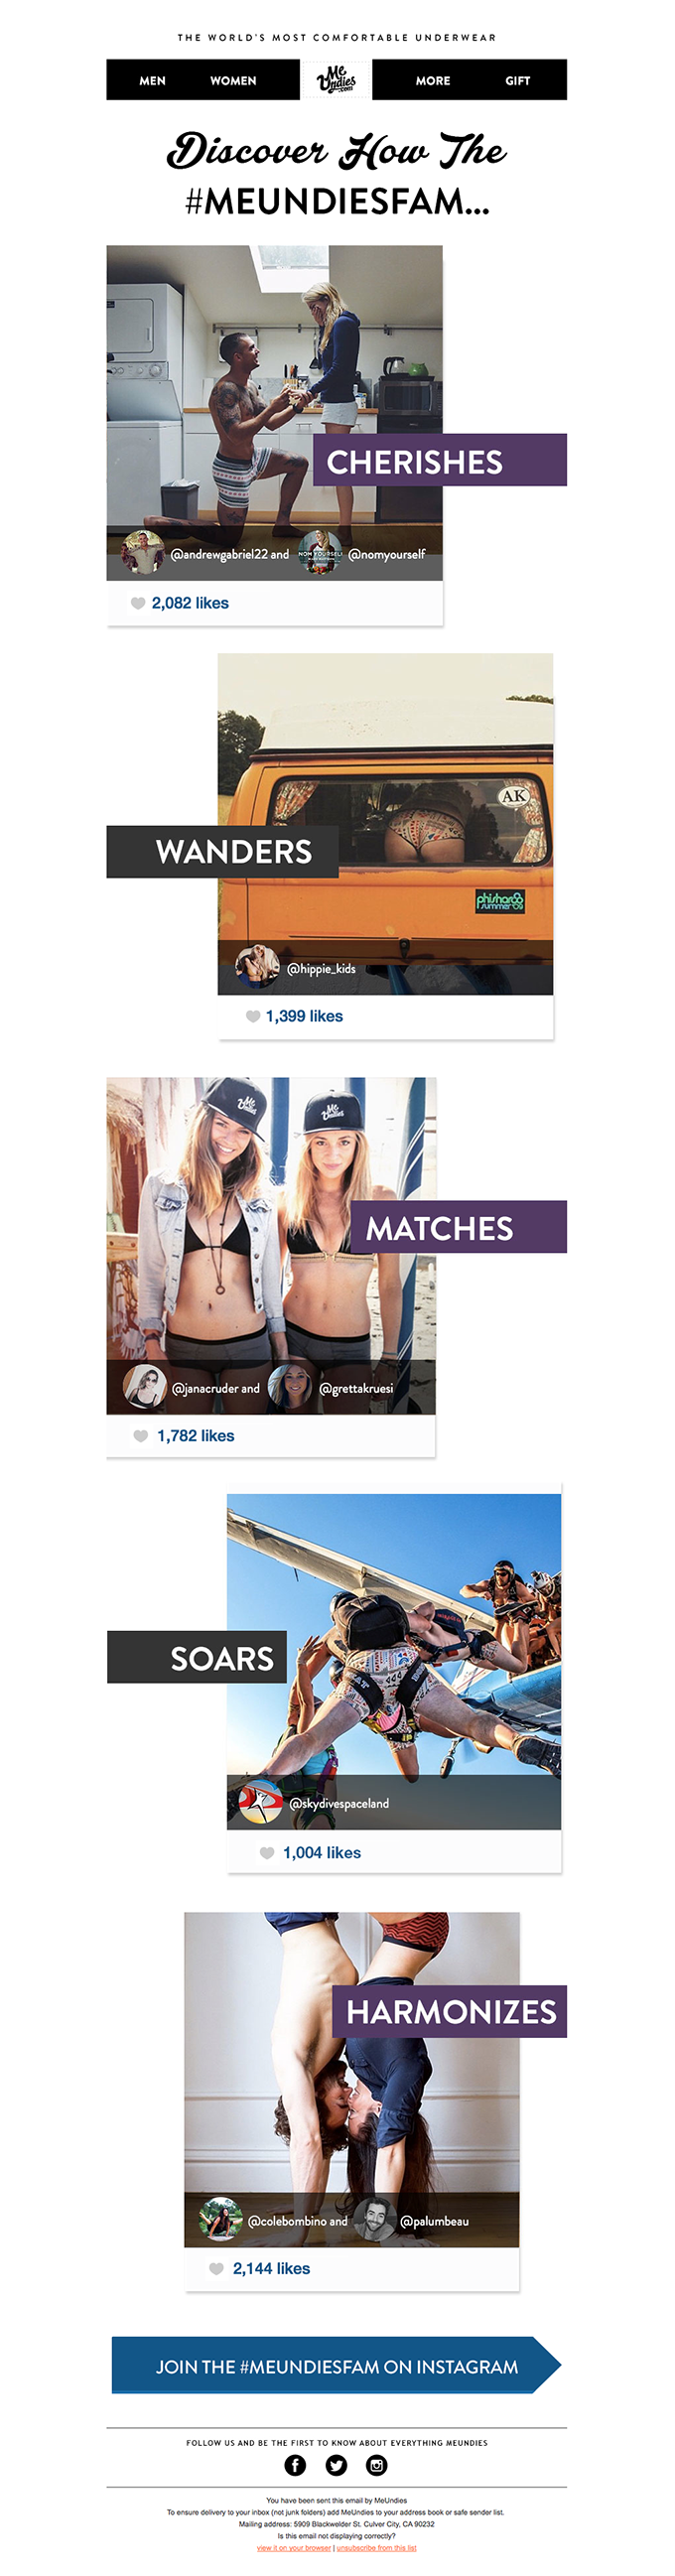 Example of user-generated social media content being repurposed for an email marketing campaign from Me Undies